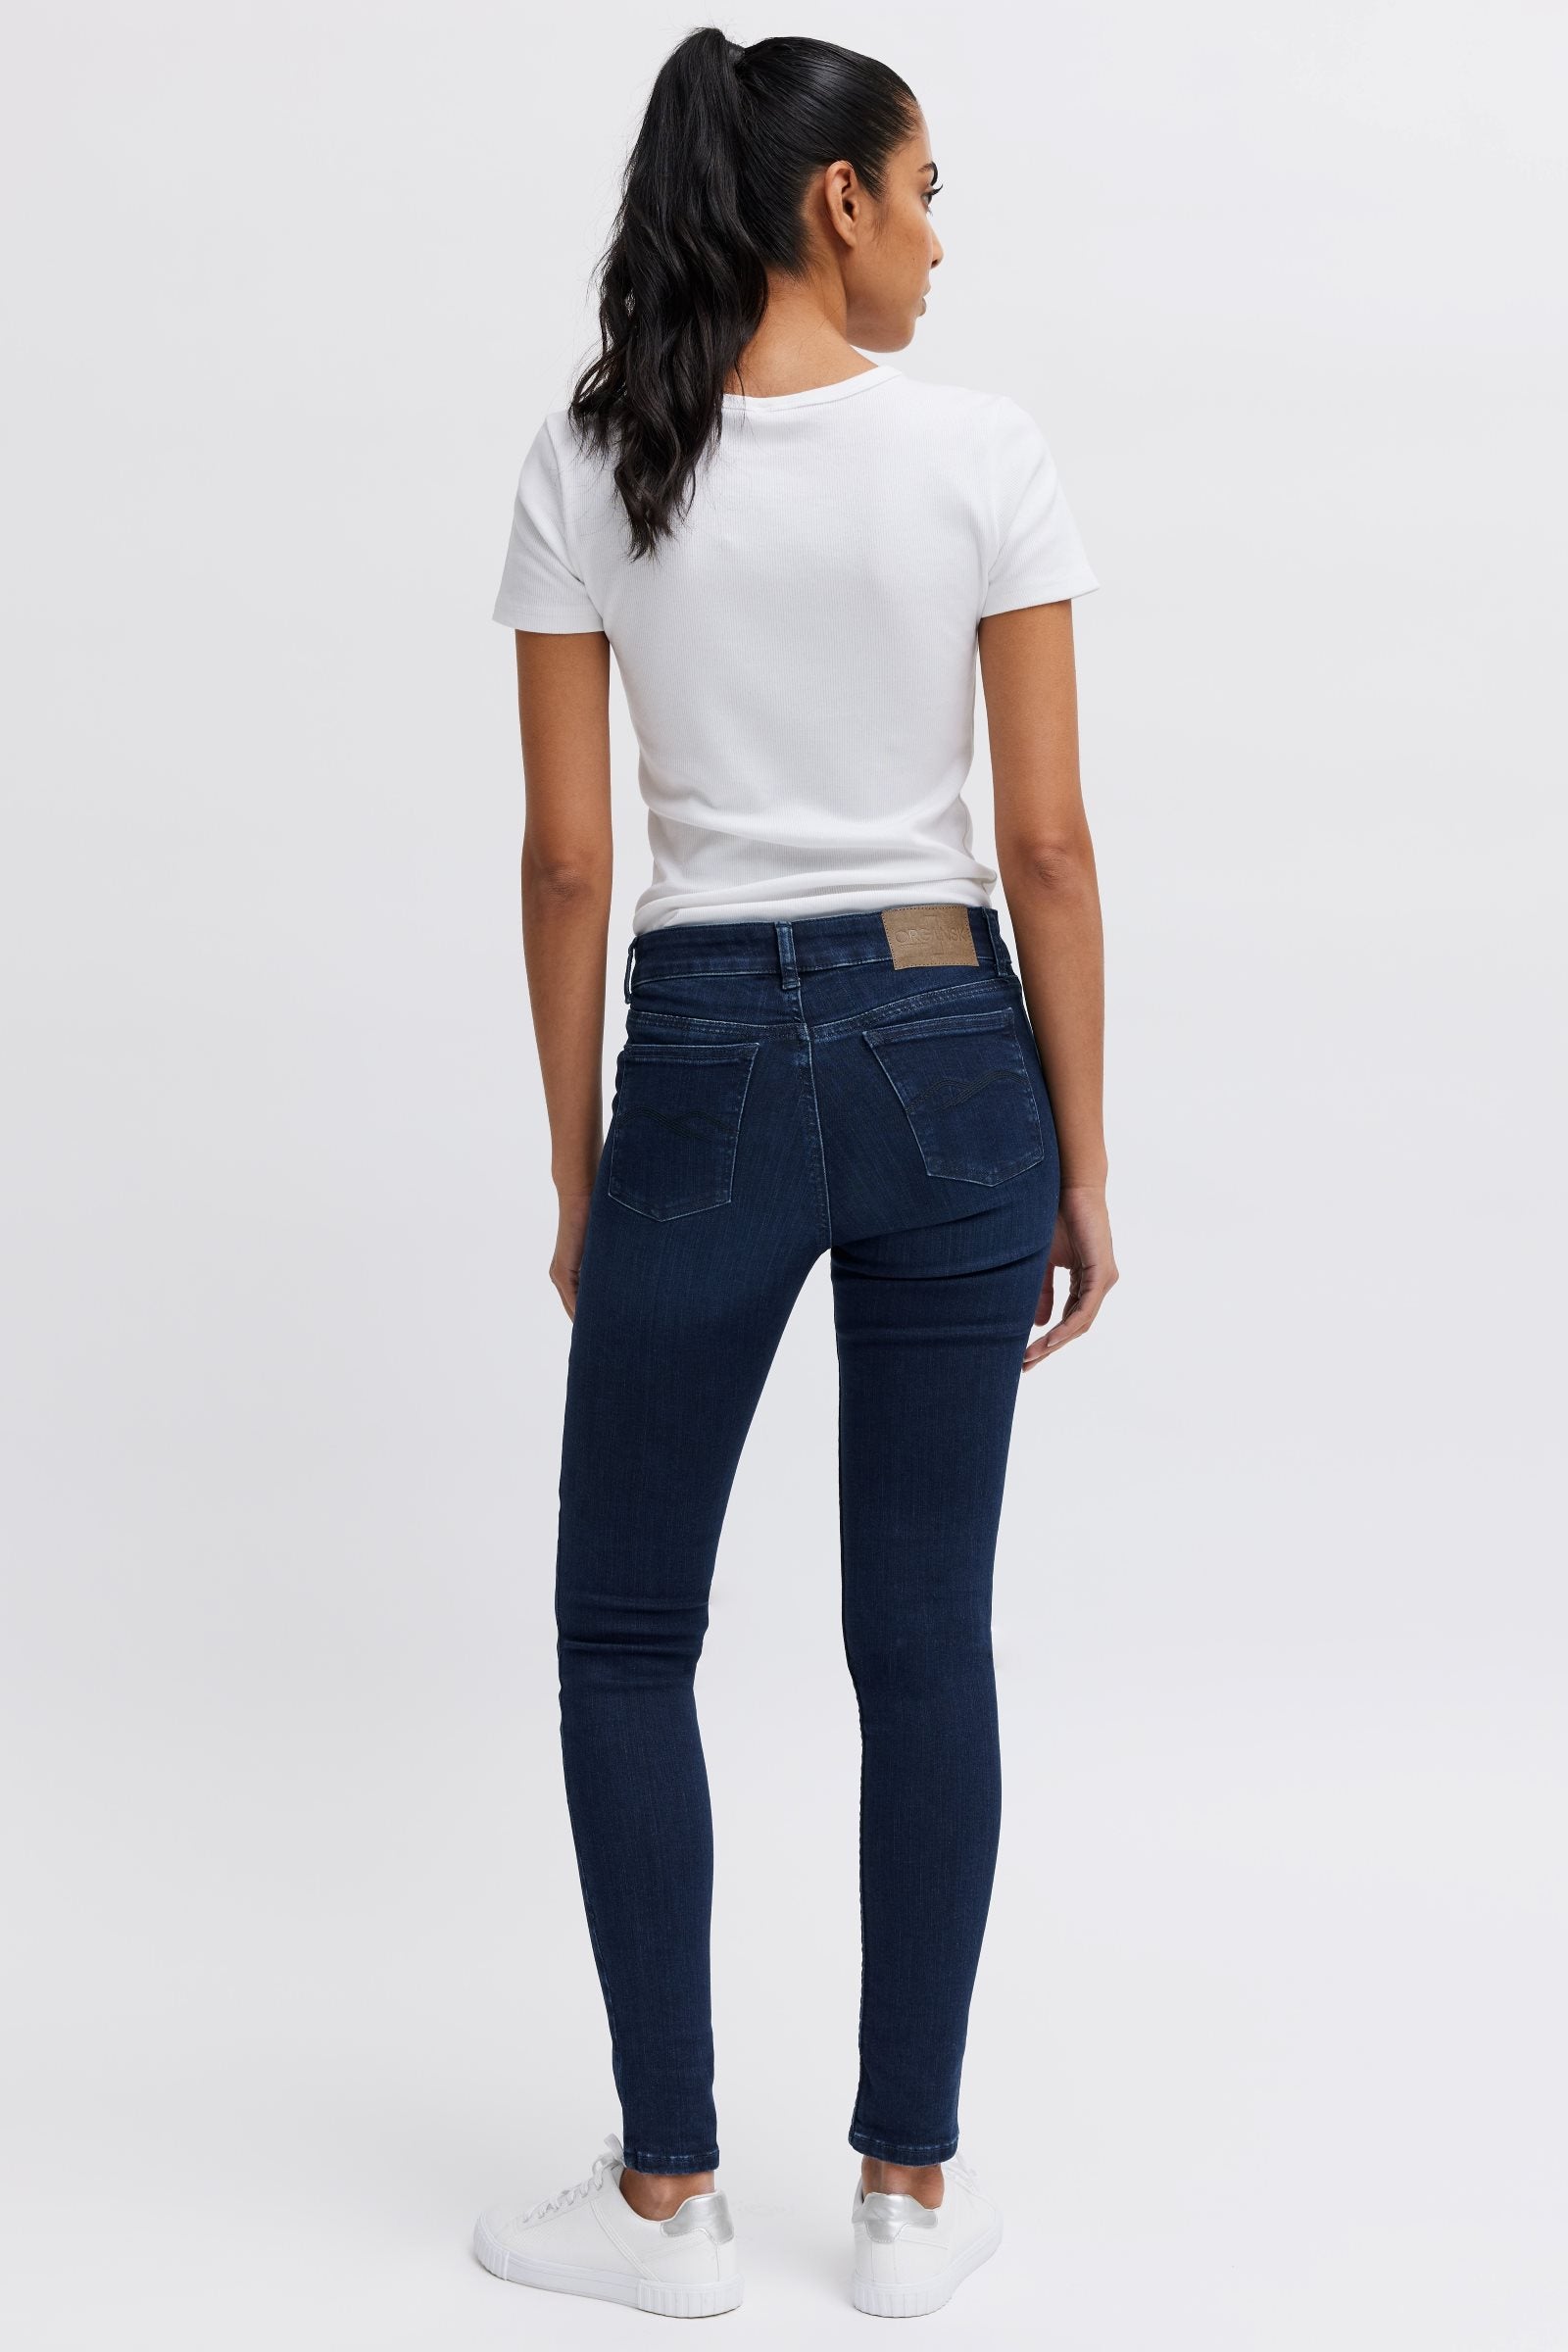 Women's organic slim fit jeans - the perfect fit